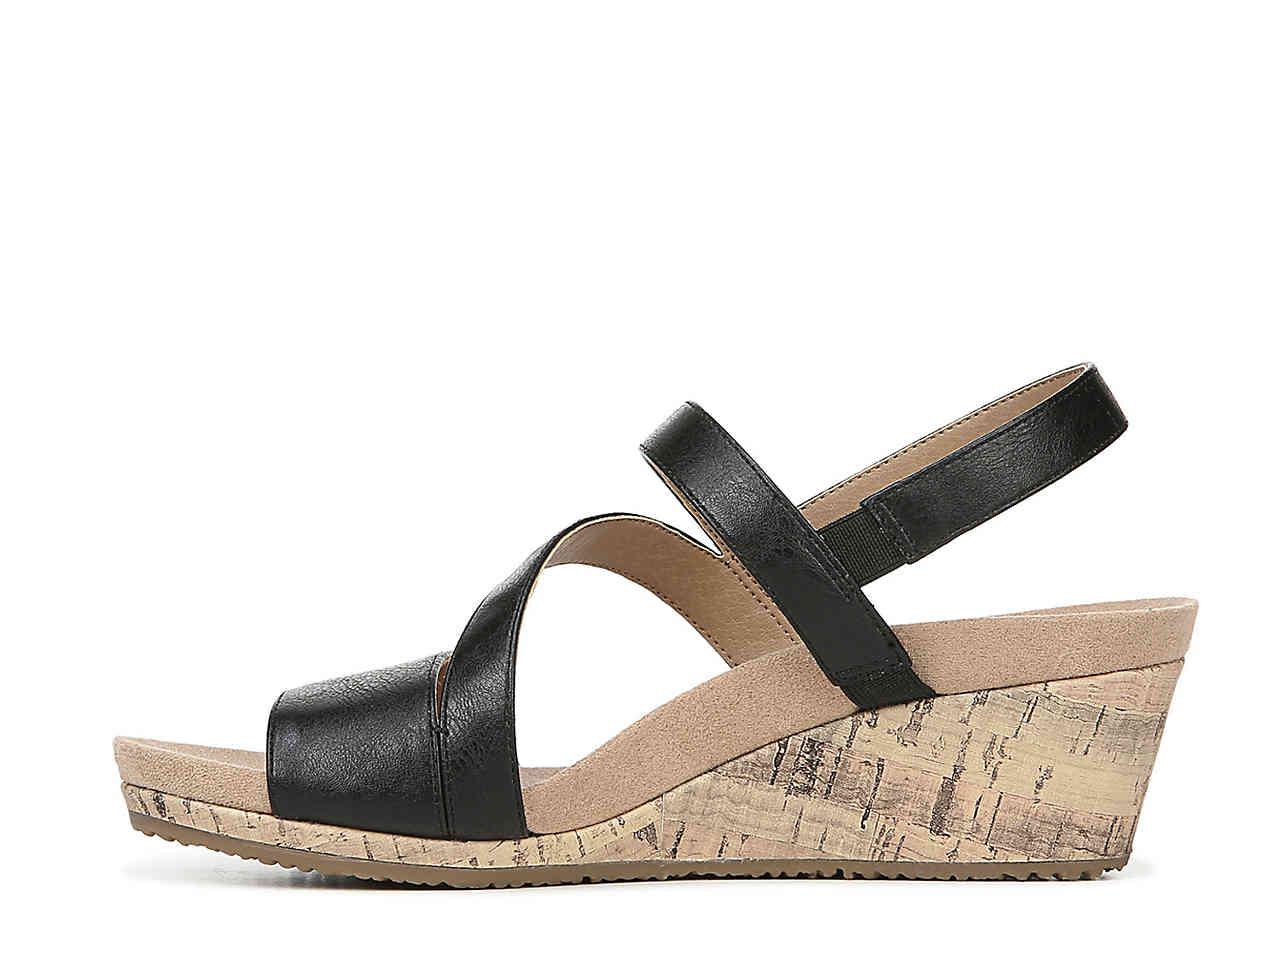 LifeStride Leather Milly Wedge Sandal in Black Lyst